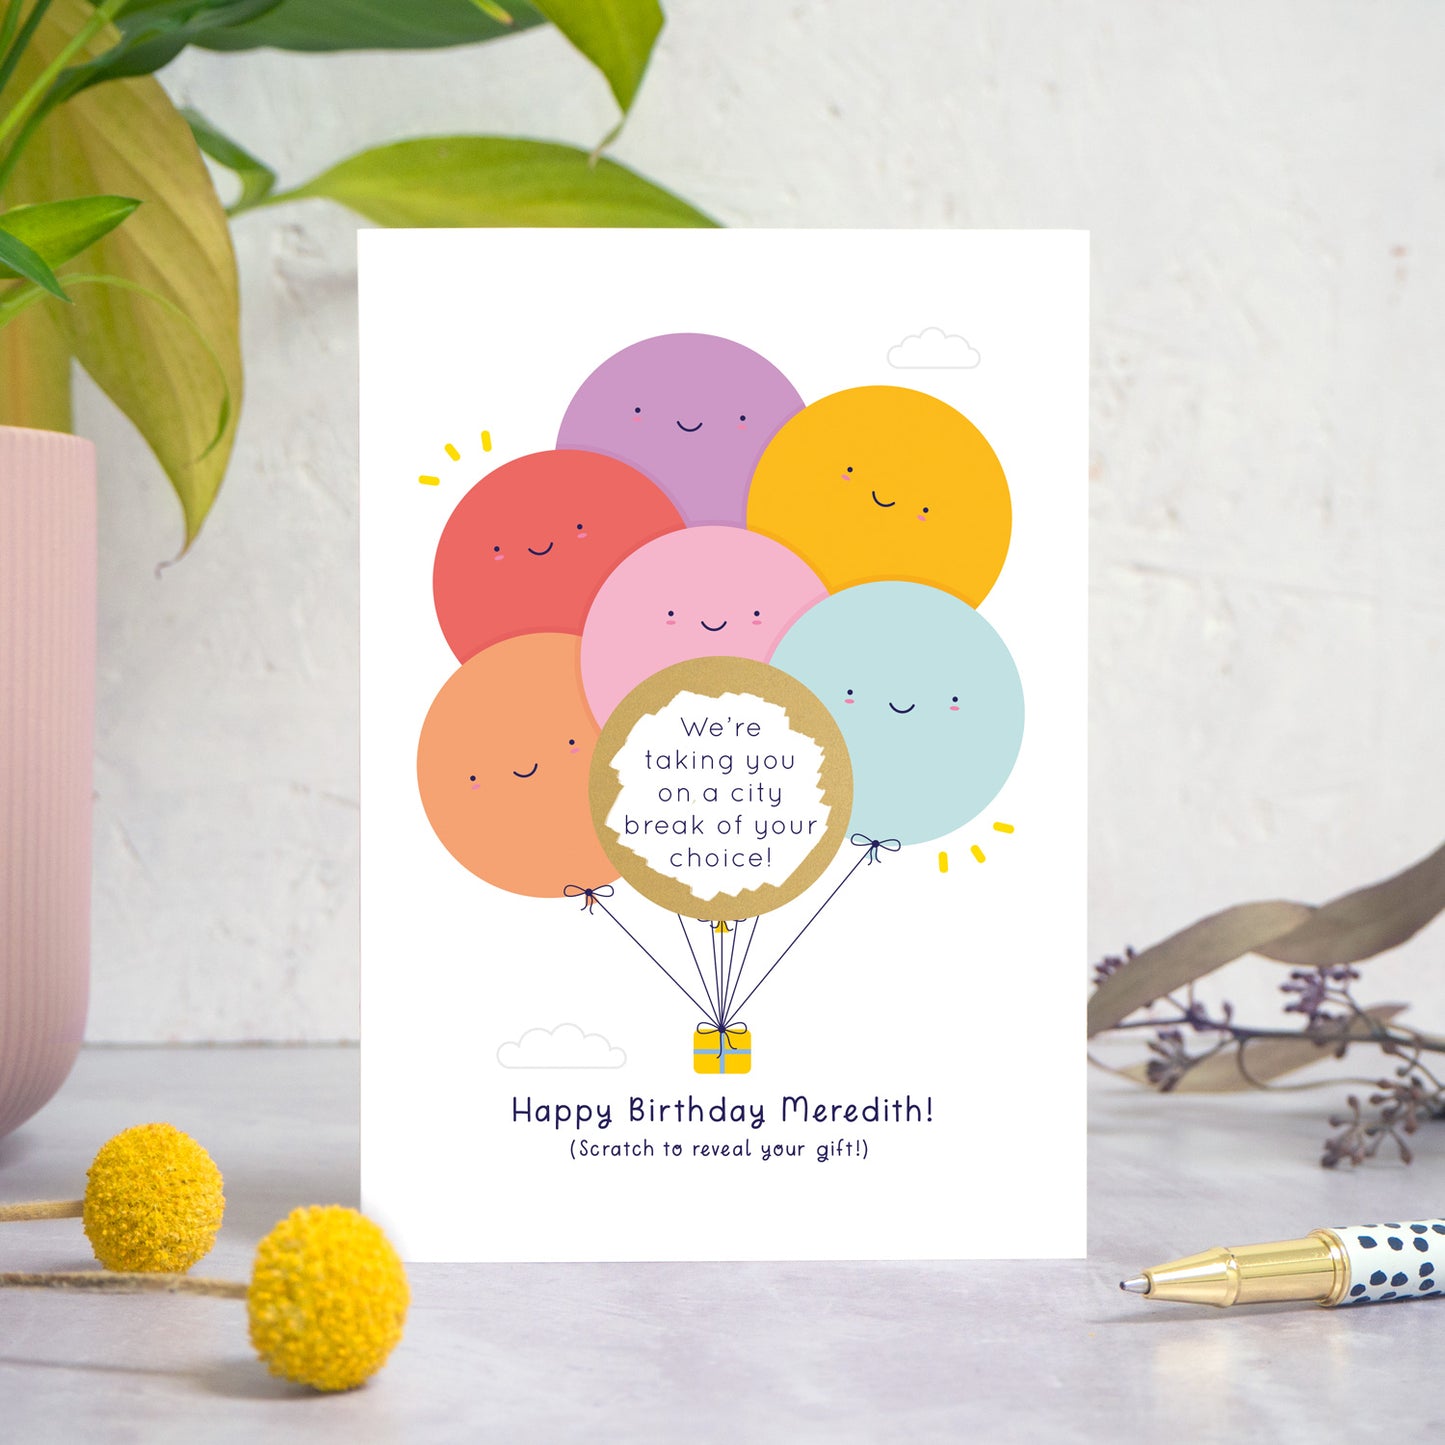 A ‘happy birthday’ scratch card photographed on a white and grey background with a plant on the left and foliage and a pen on the right. This is the rainbow version of the card after it has been scratched off.